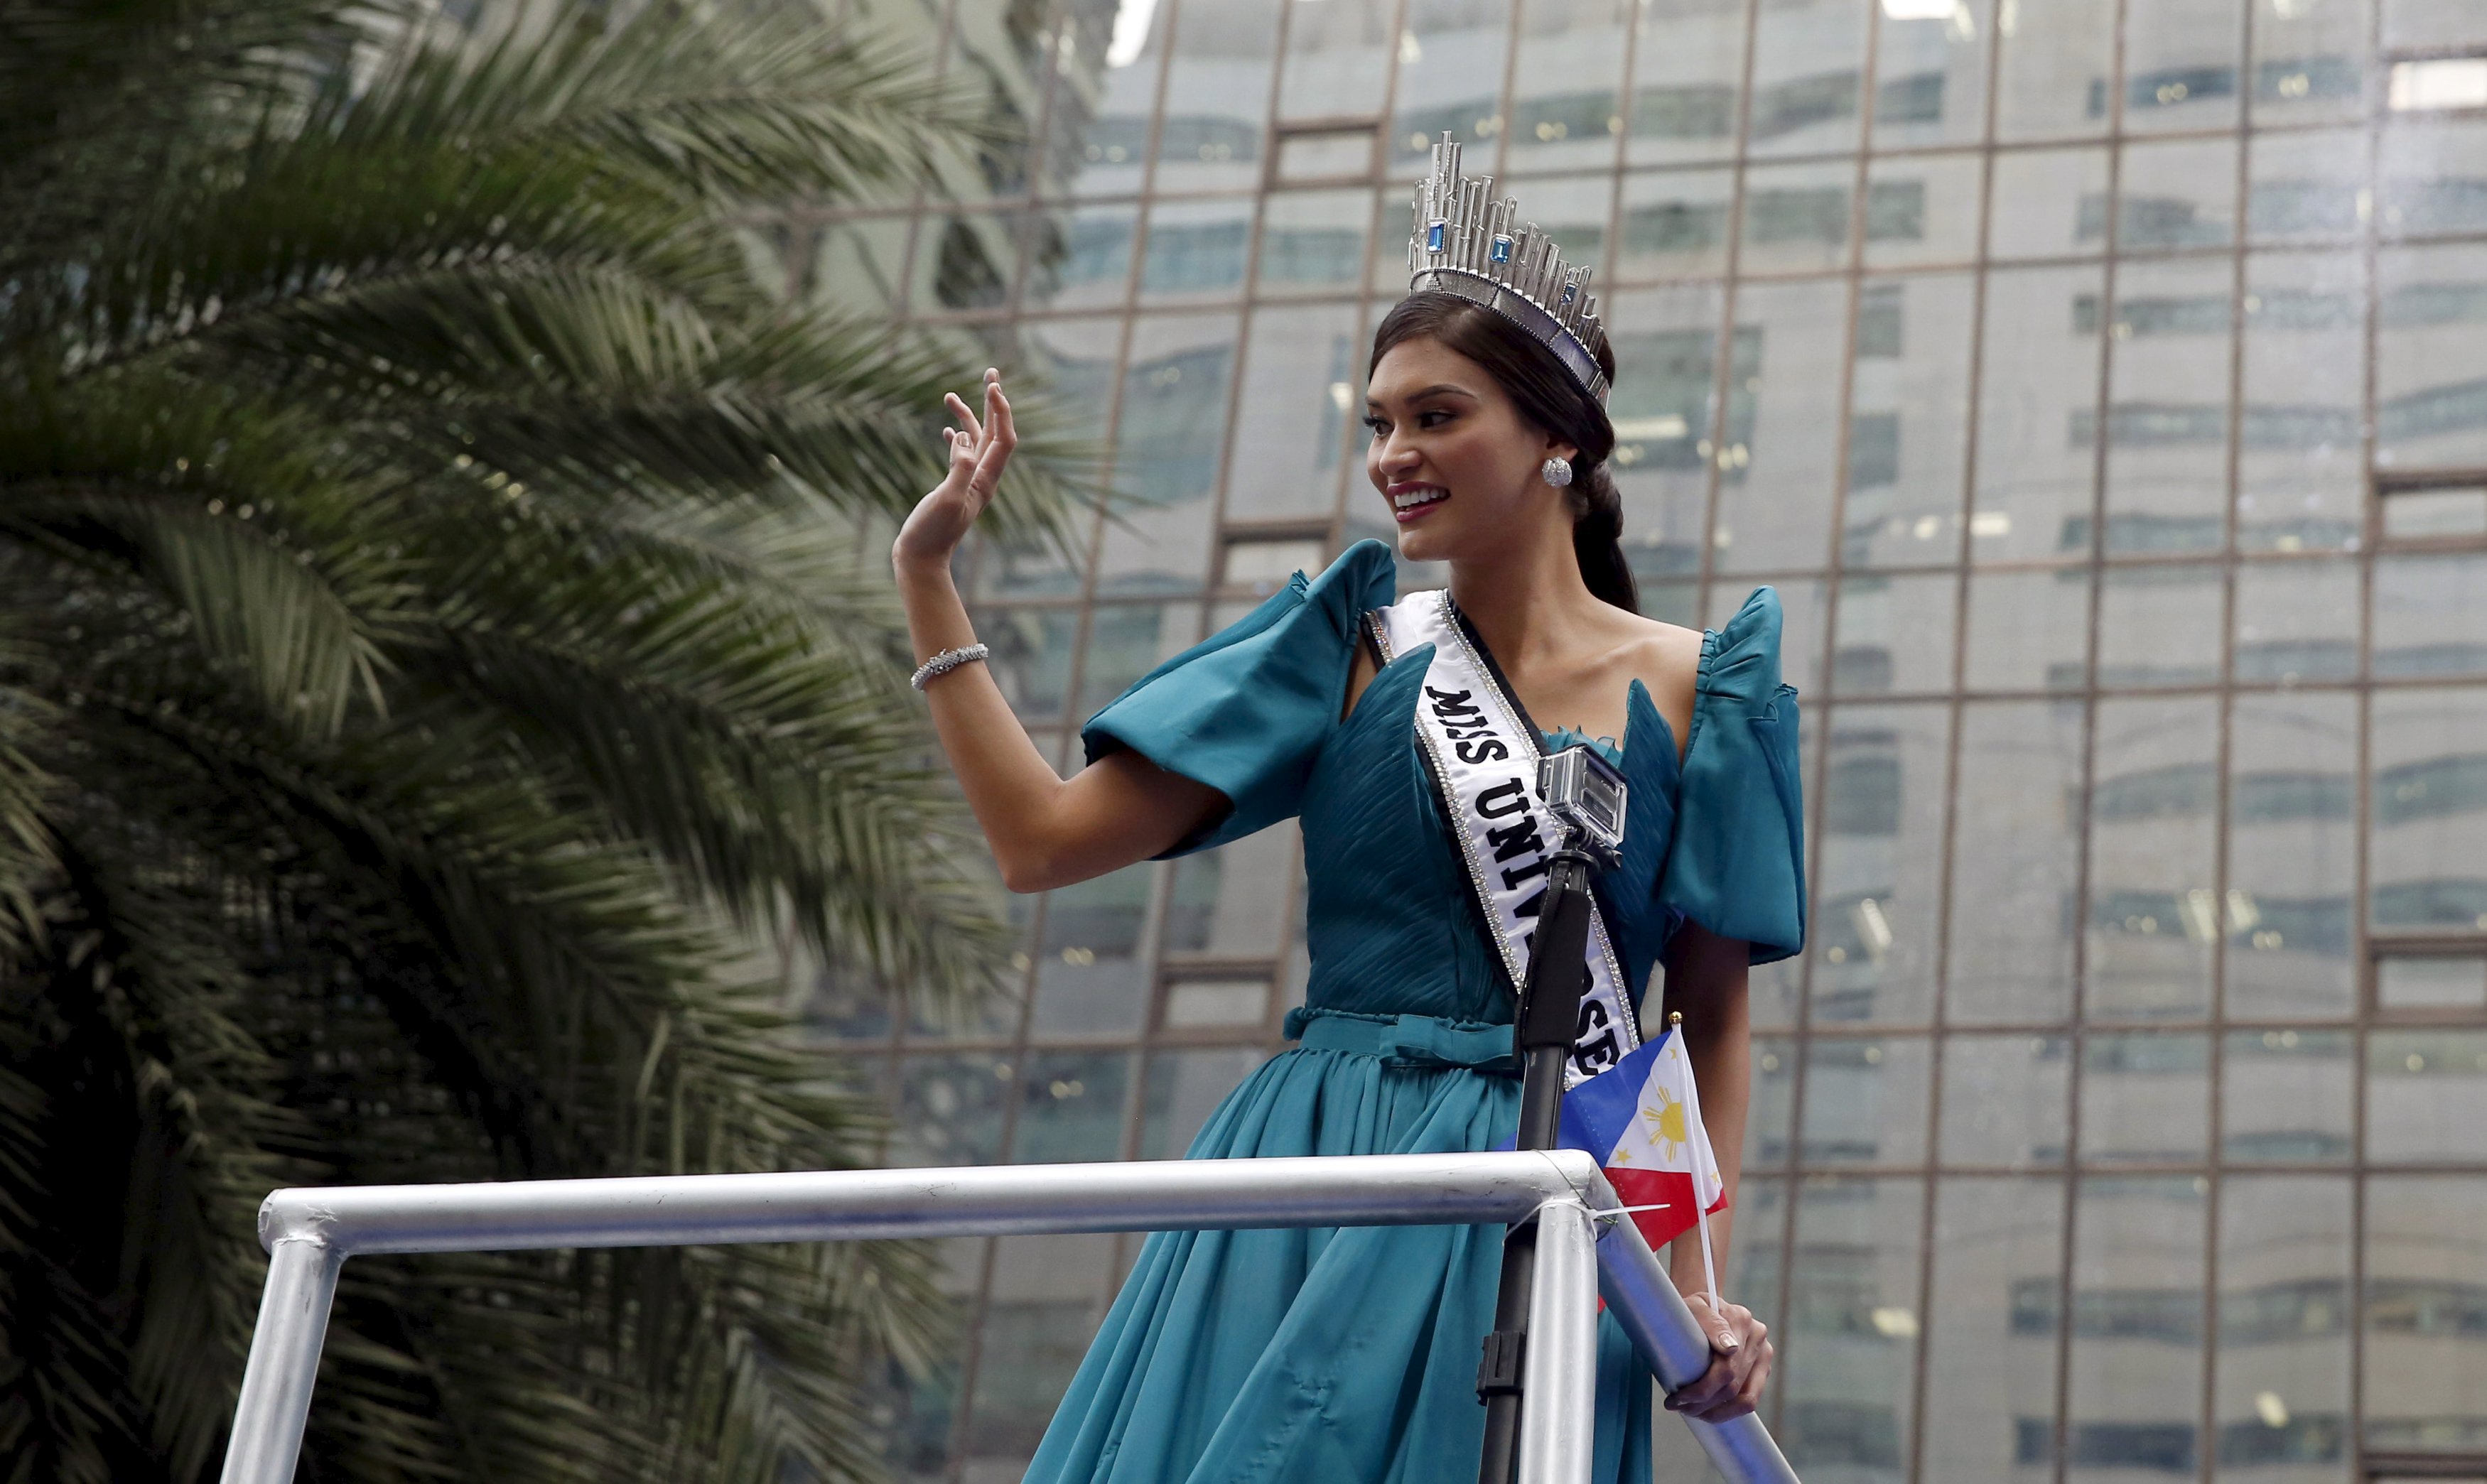 Miss Universe 2015 Pia Alonzo Wurtzbach waves to fans as her motorcade passes along Ayala Avenue in Manila's Makati financial district, January 25, 2016. Wurtzbach, the first Miss Universe from the Philippines in more than four decades, said on Sunday she will spend her reign bringing awareness to issues like HIV and draw support for countries vulnerable to disasters.  REUTERS/Erik De Castro